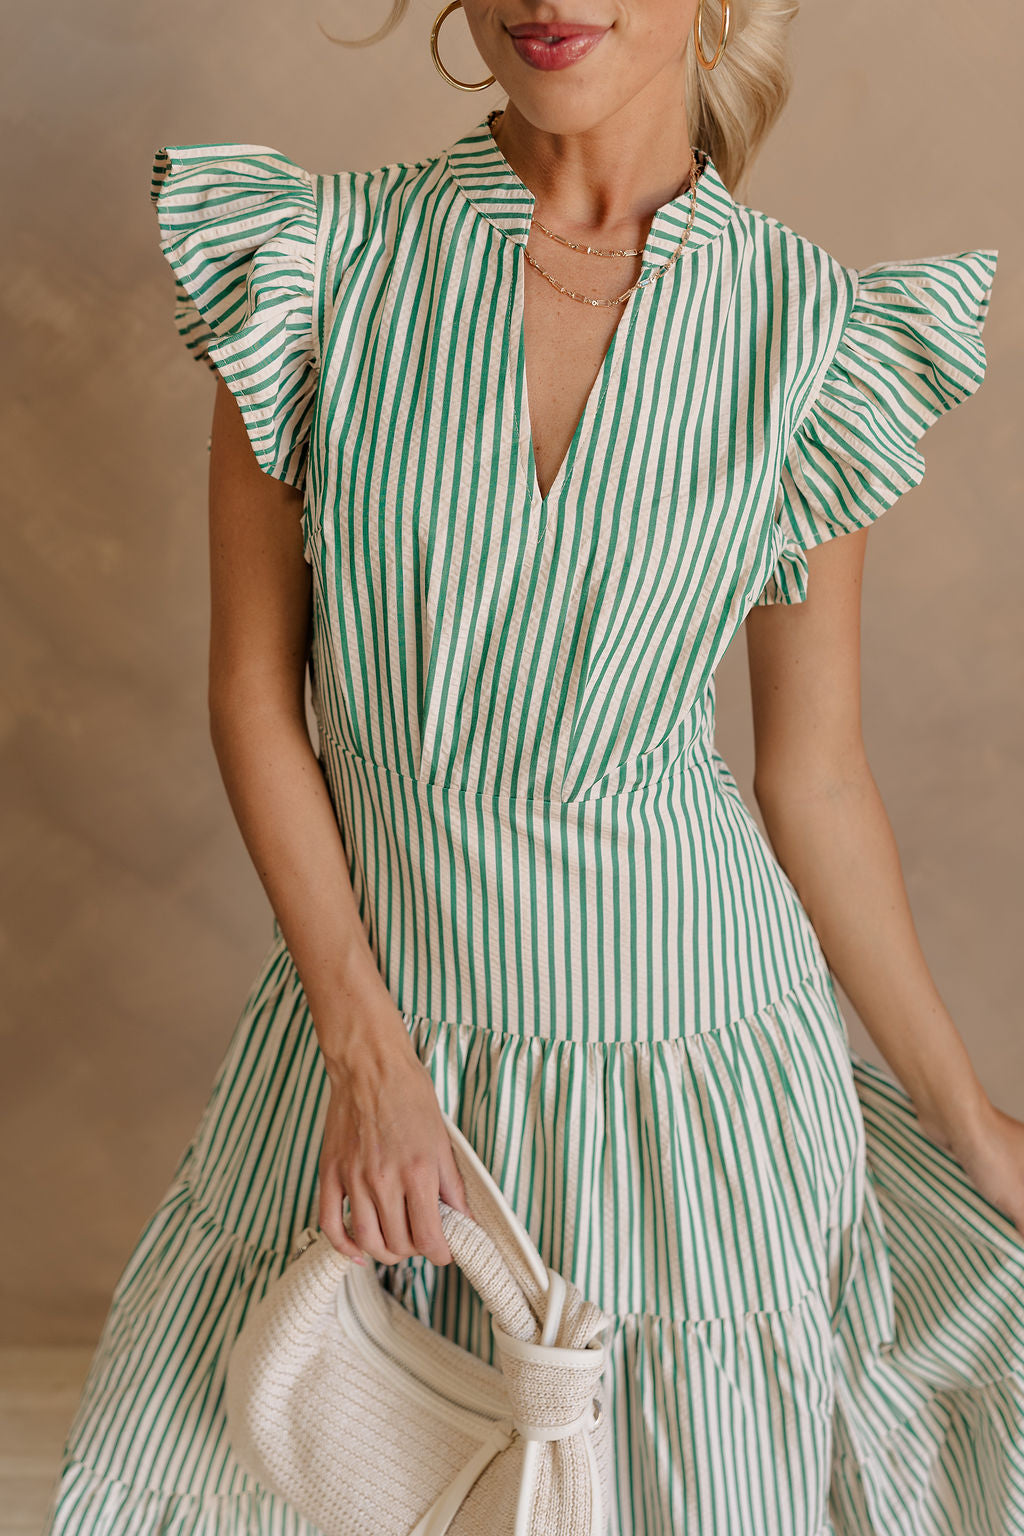 Upper body front view of female model wearing the Zoey Green & Cream Striped Midi Dress that has green and cream stripes, ruffled cap sleeves, a v-neck, tiered skirt, pockets, and an open back detail. Model is holding beige purse.